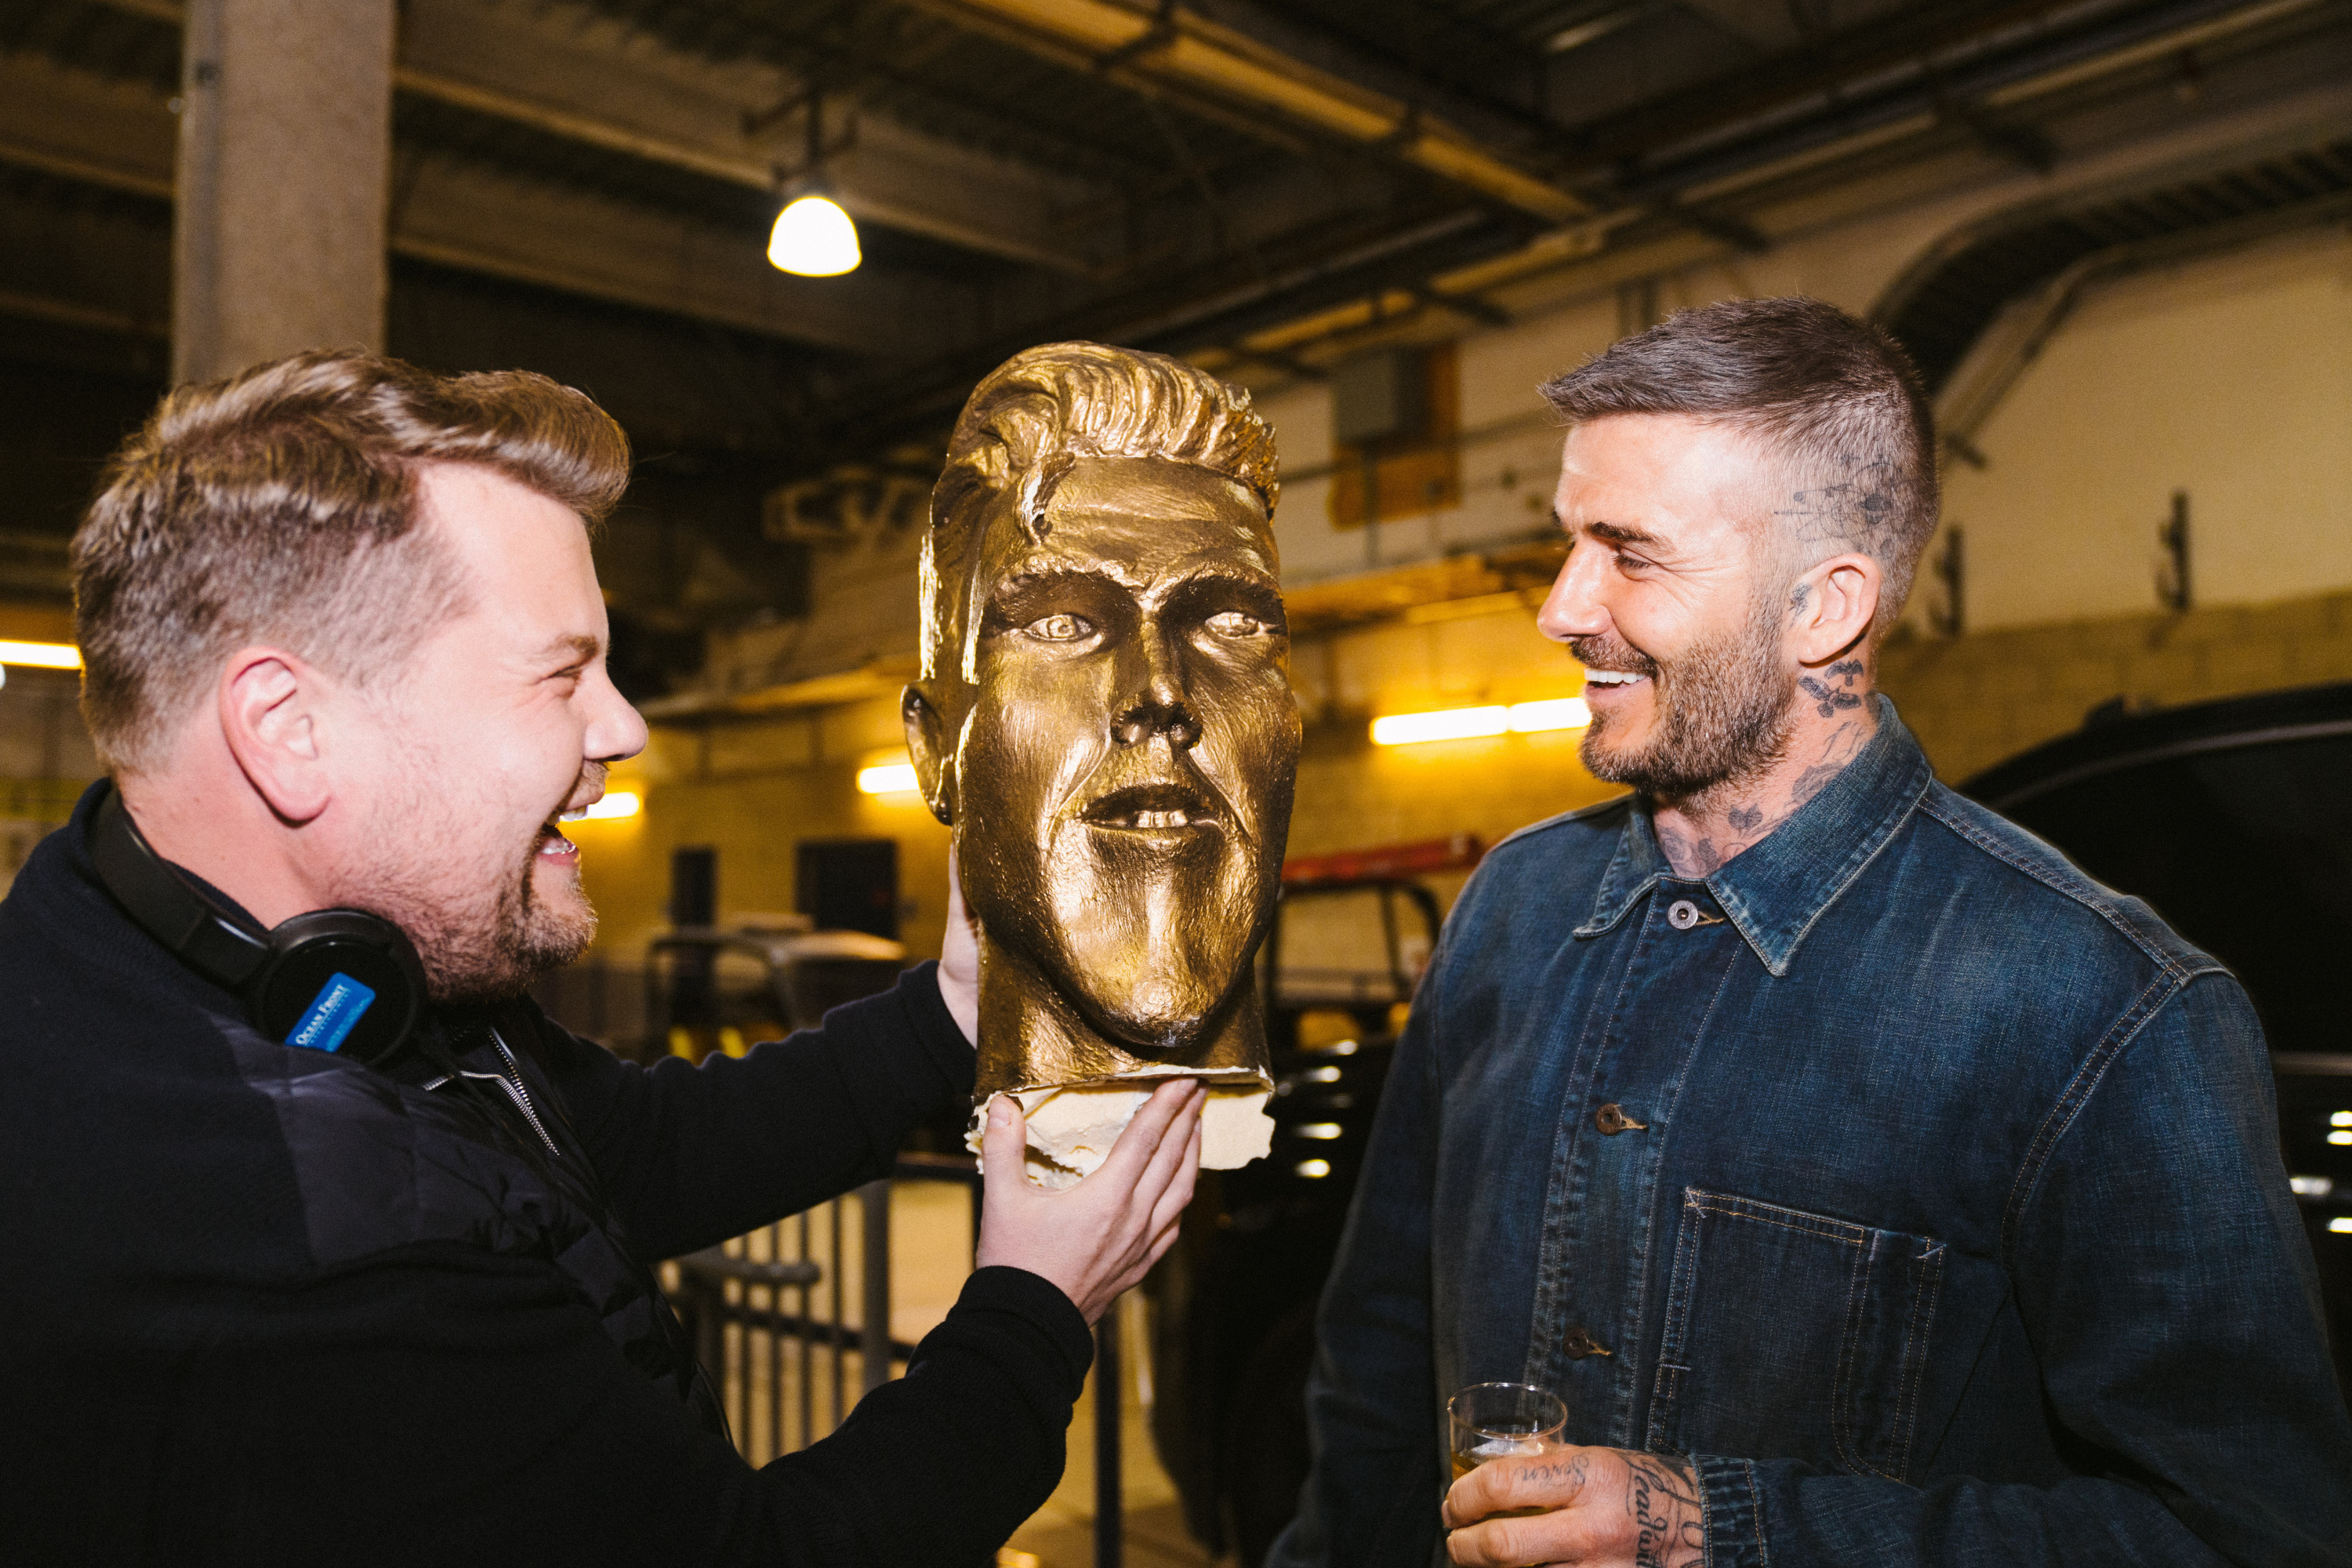 David Beckham was gifted a distorted bust of himself